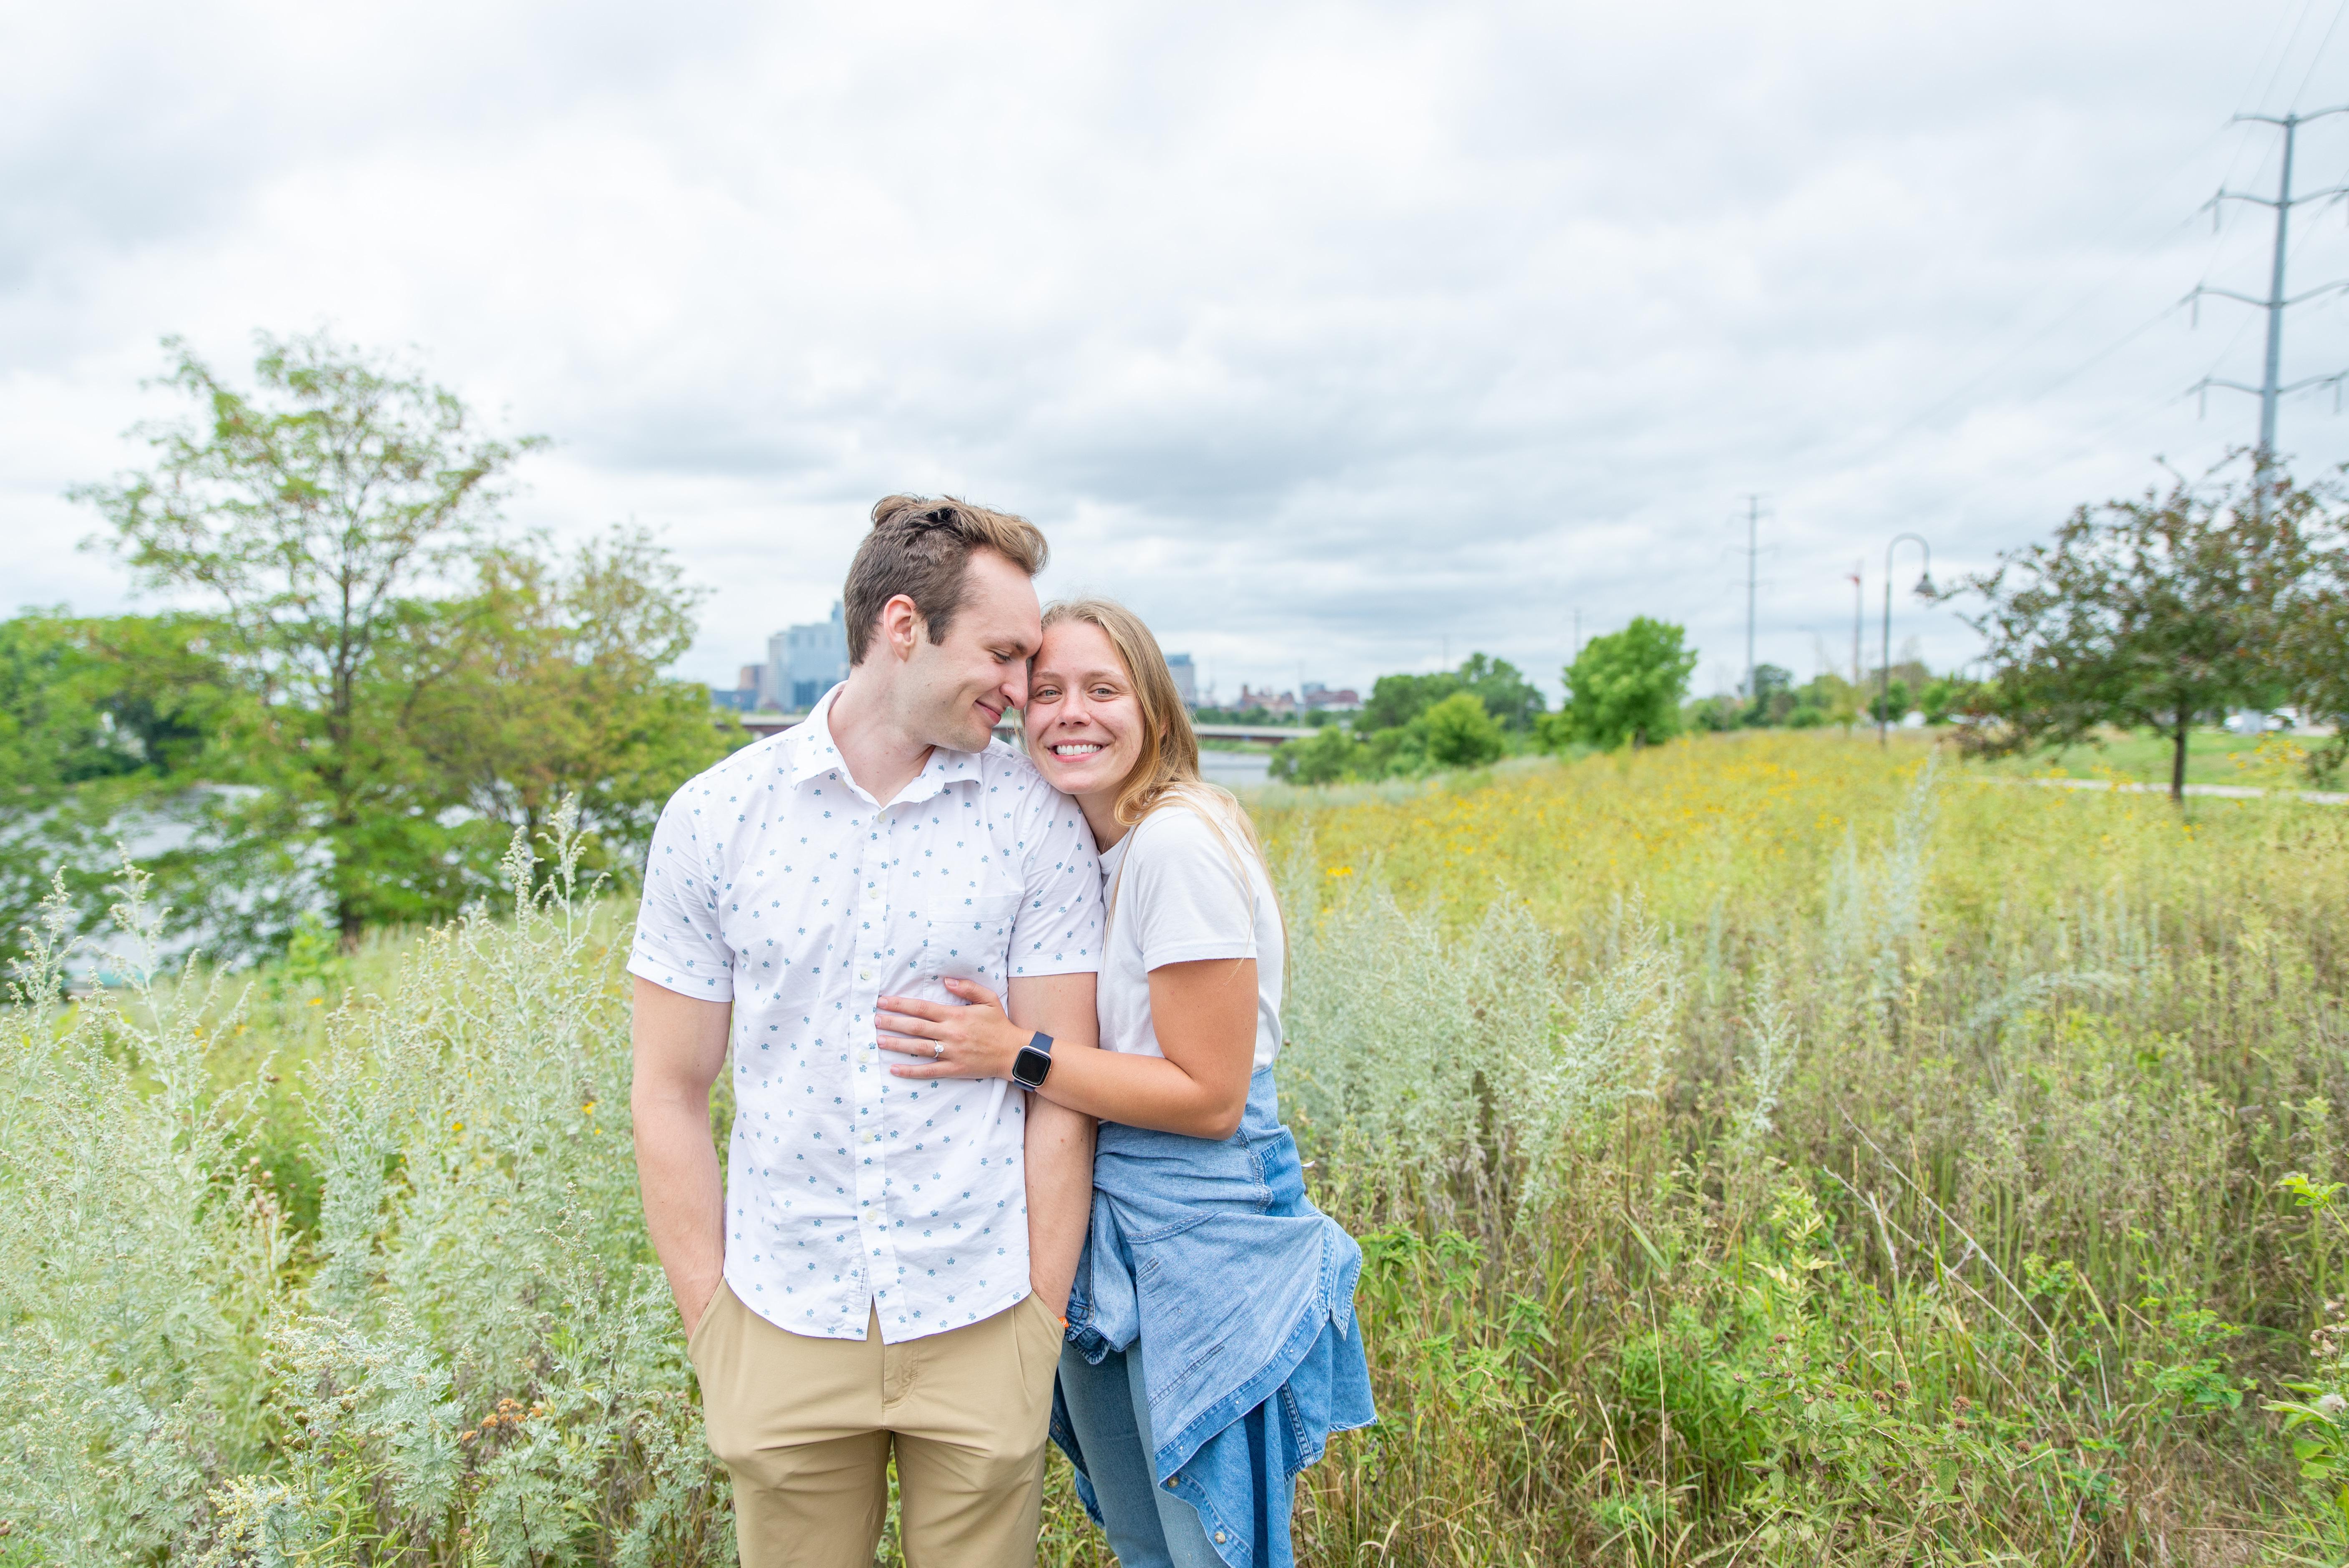 The Wedding Website of Autumn Nelsen and Connor Lund